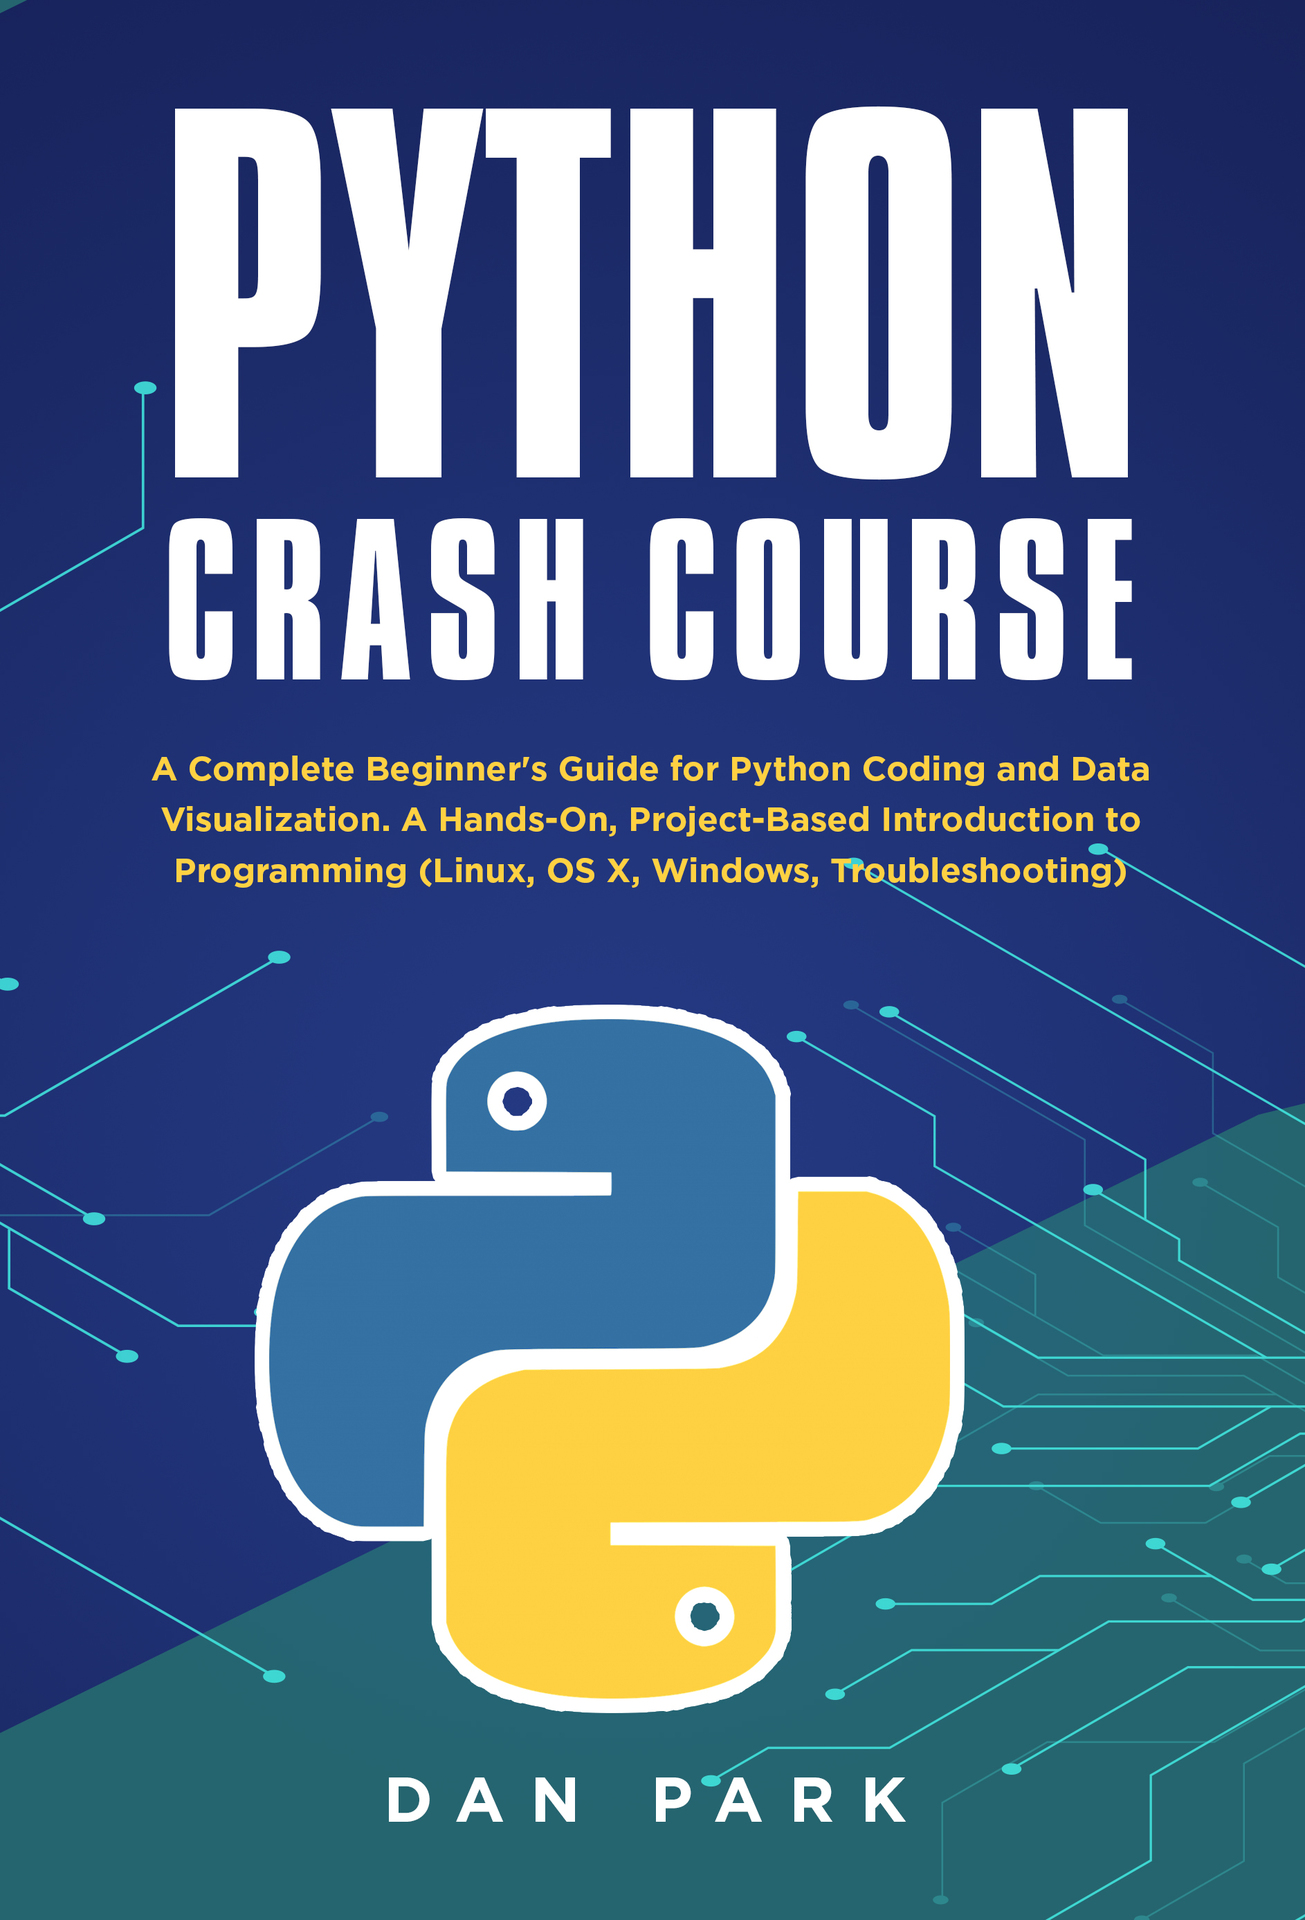 Python Crash Course : A Complete Beginner's Guide for Python Coding and Data Visualization. A Hands-On, Project-Based Introduction to Programming (Linux, OS X, Windows, Troubleshooting)